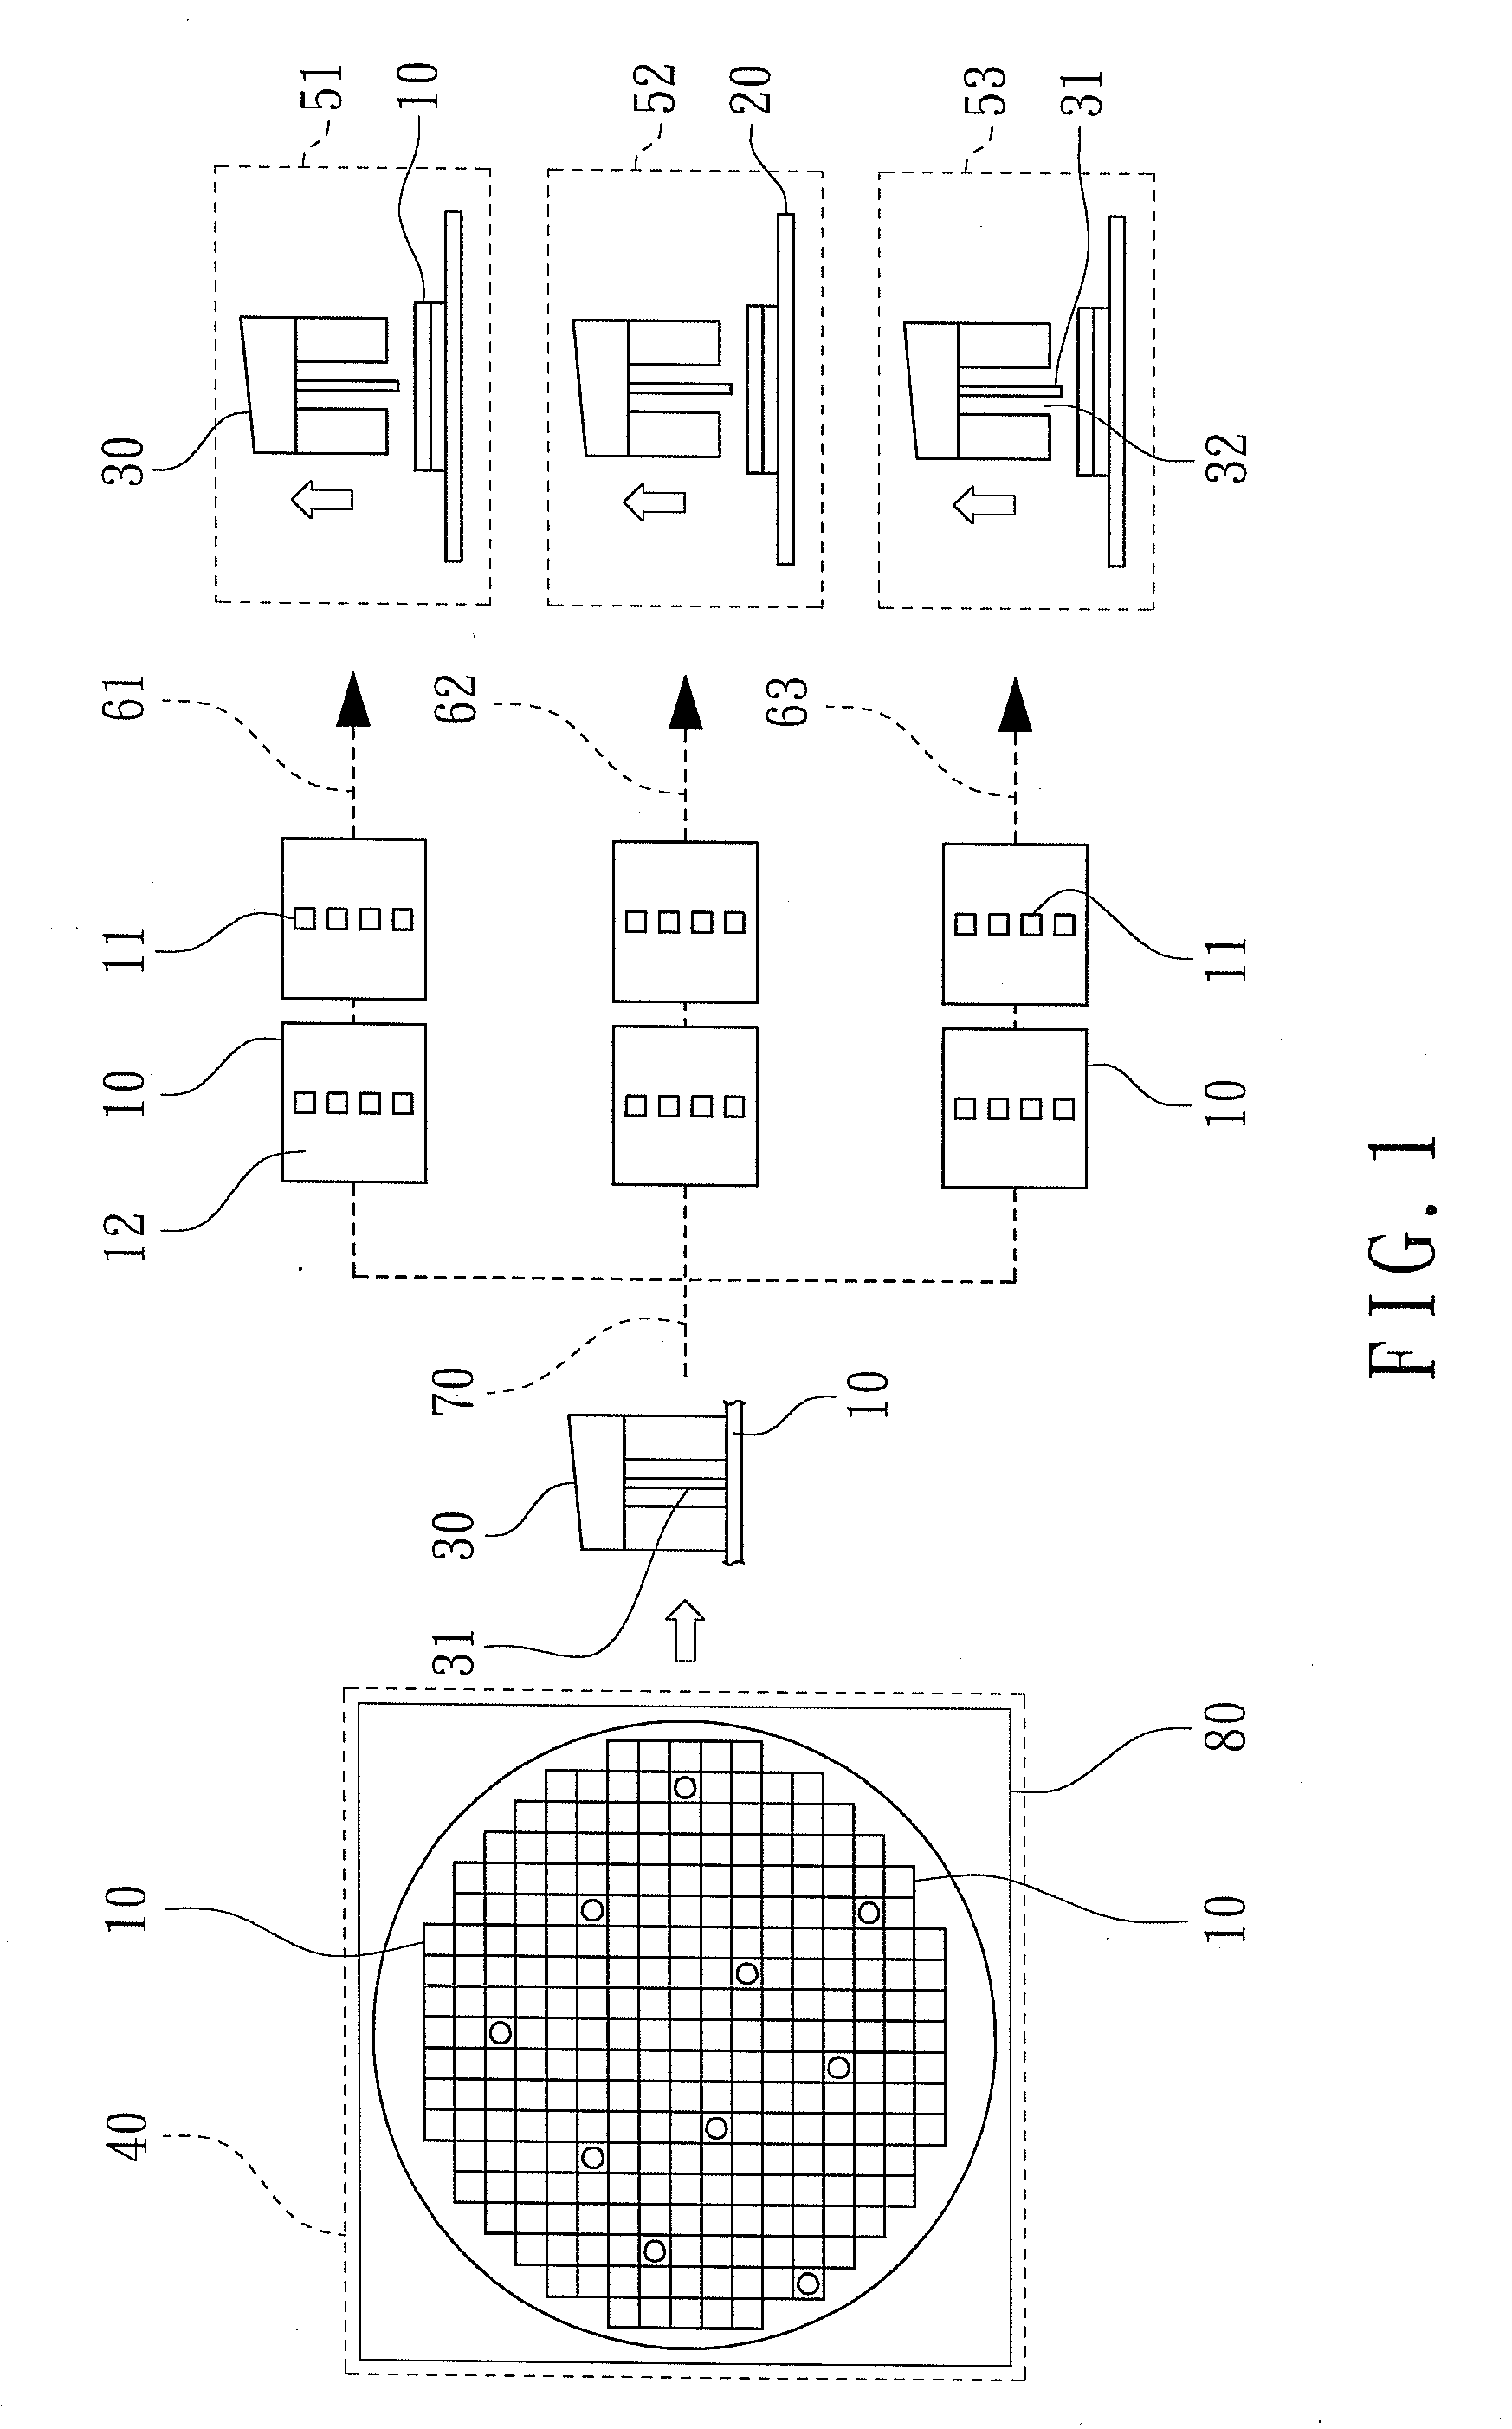 Method for die bonding having pick-and-probing feature